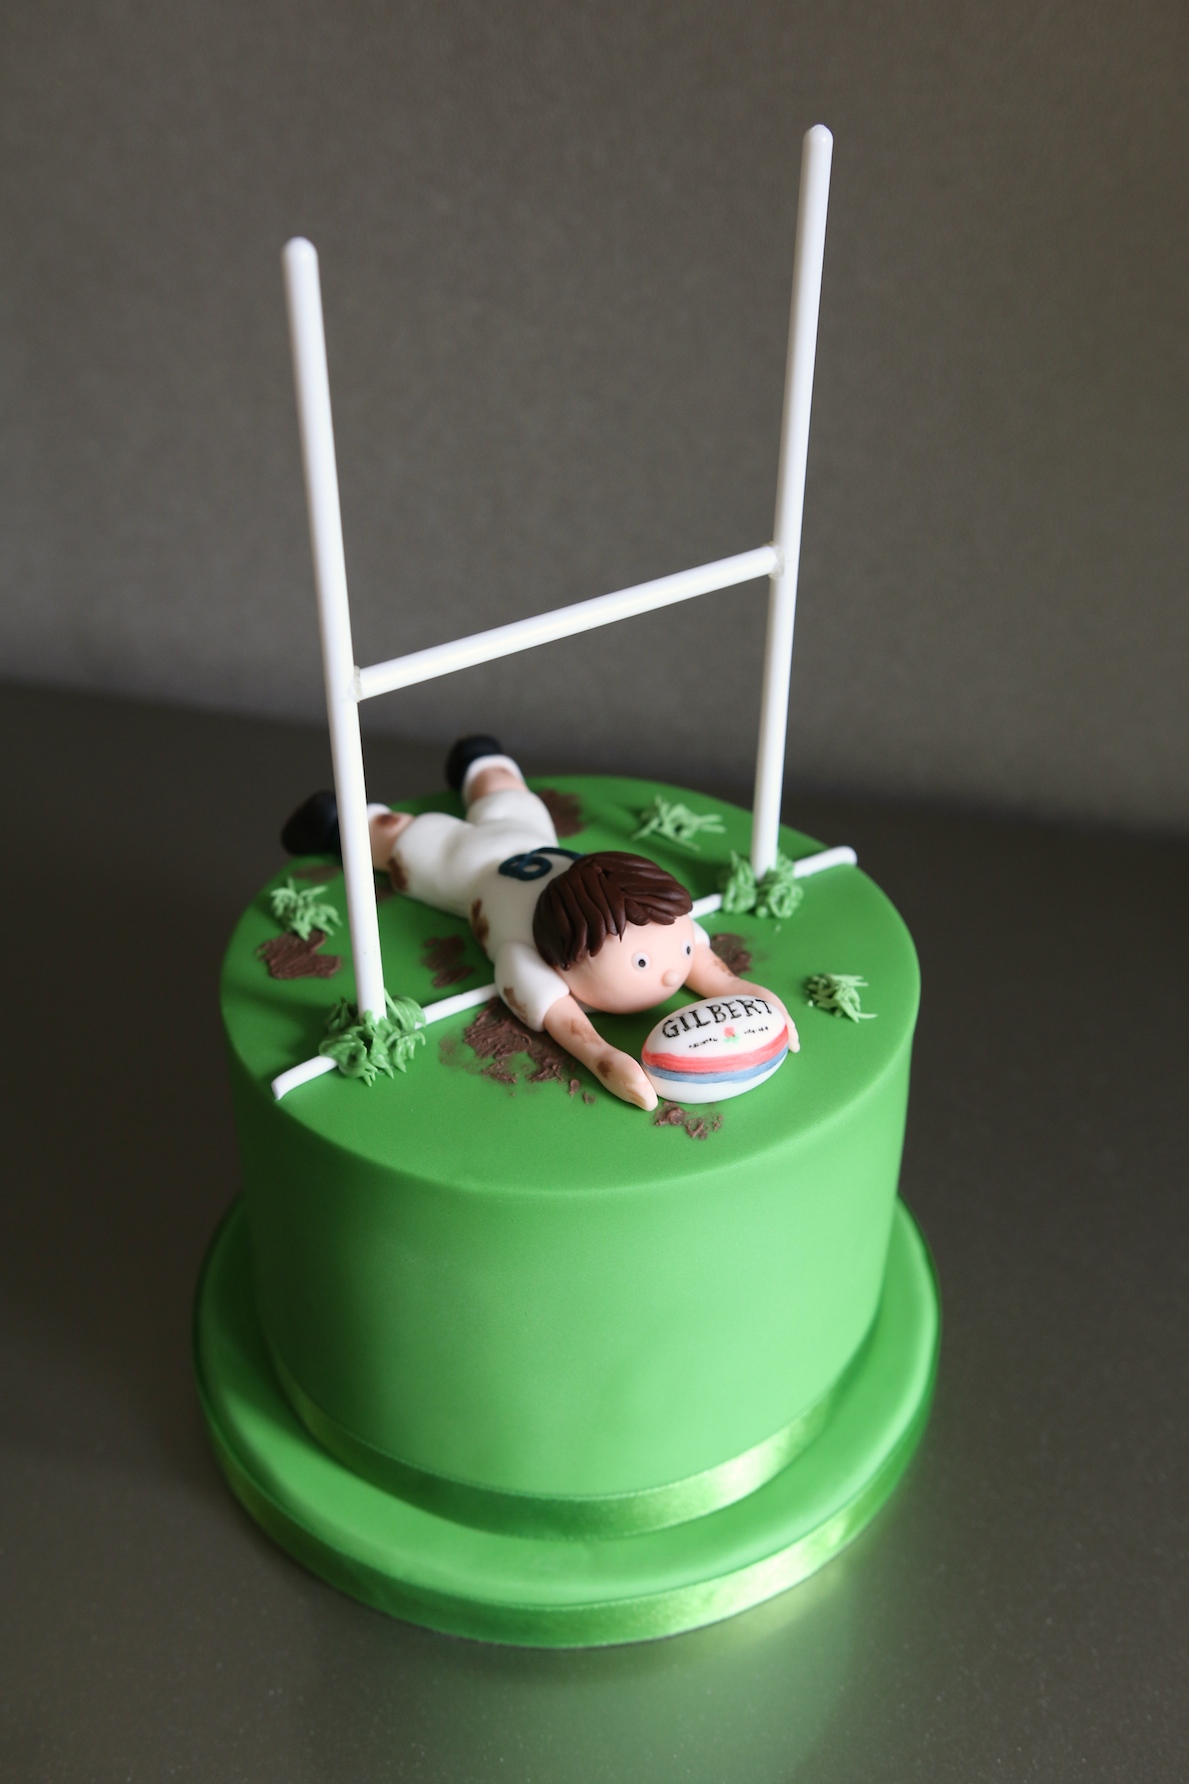 rugby birthday cake cakes themed fondant afternooncrumbs happy dad boys boy 10th crumbs afternoon visit